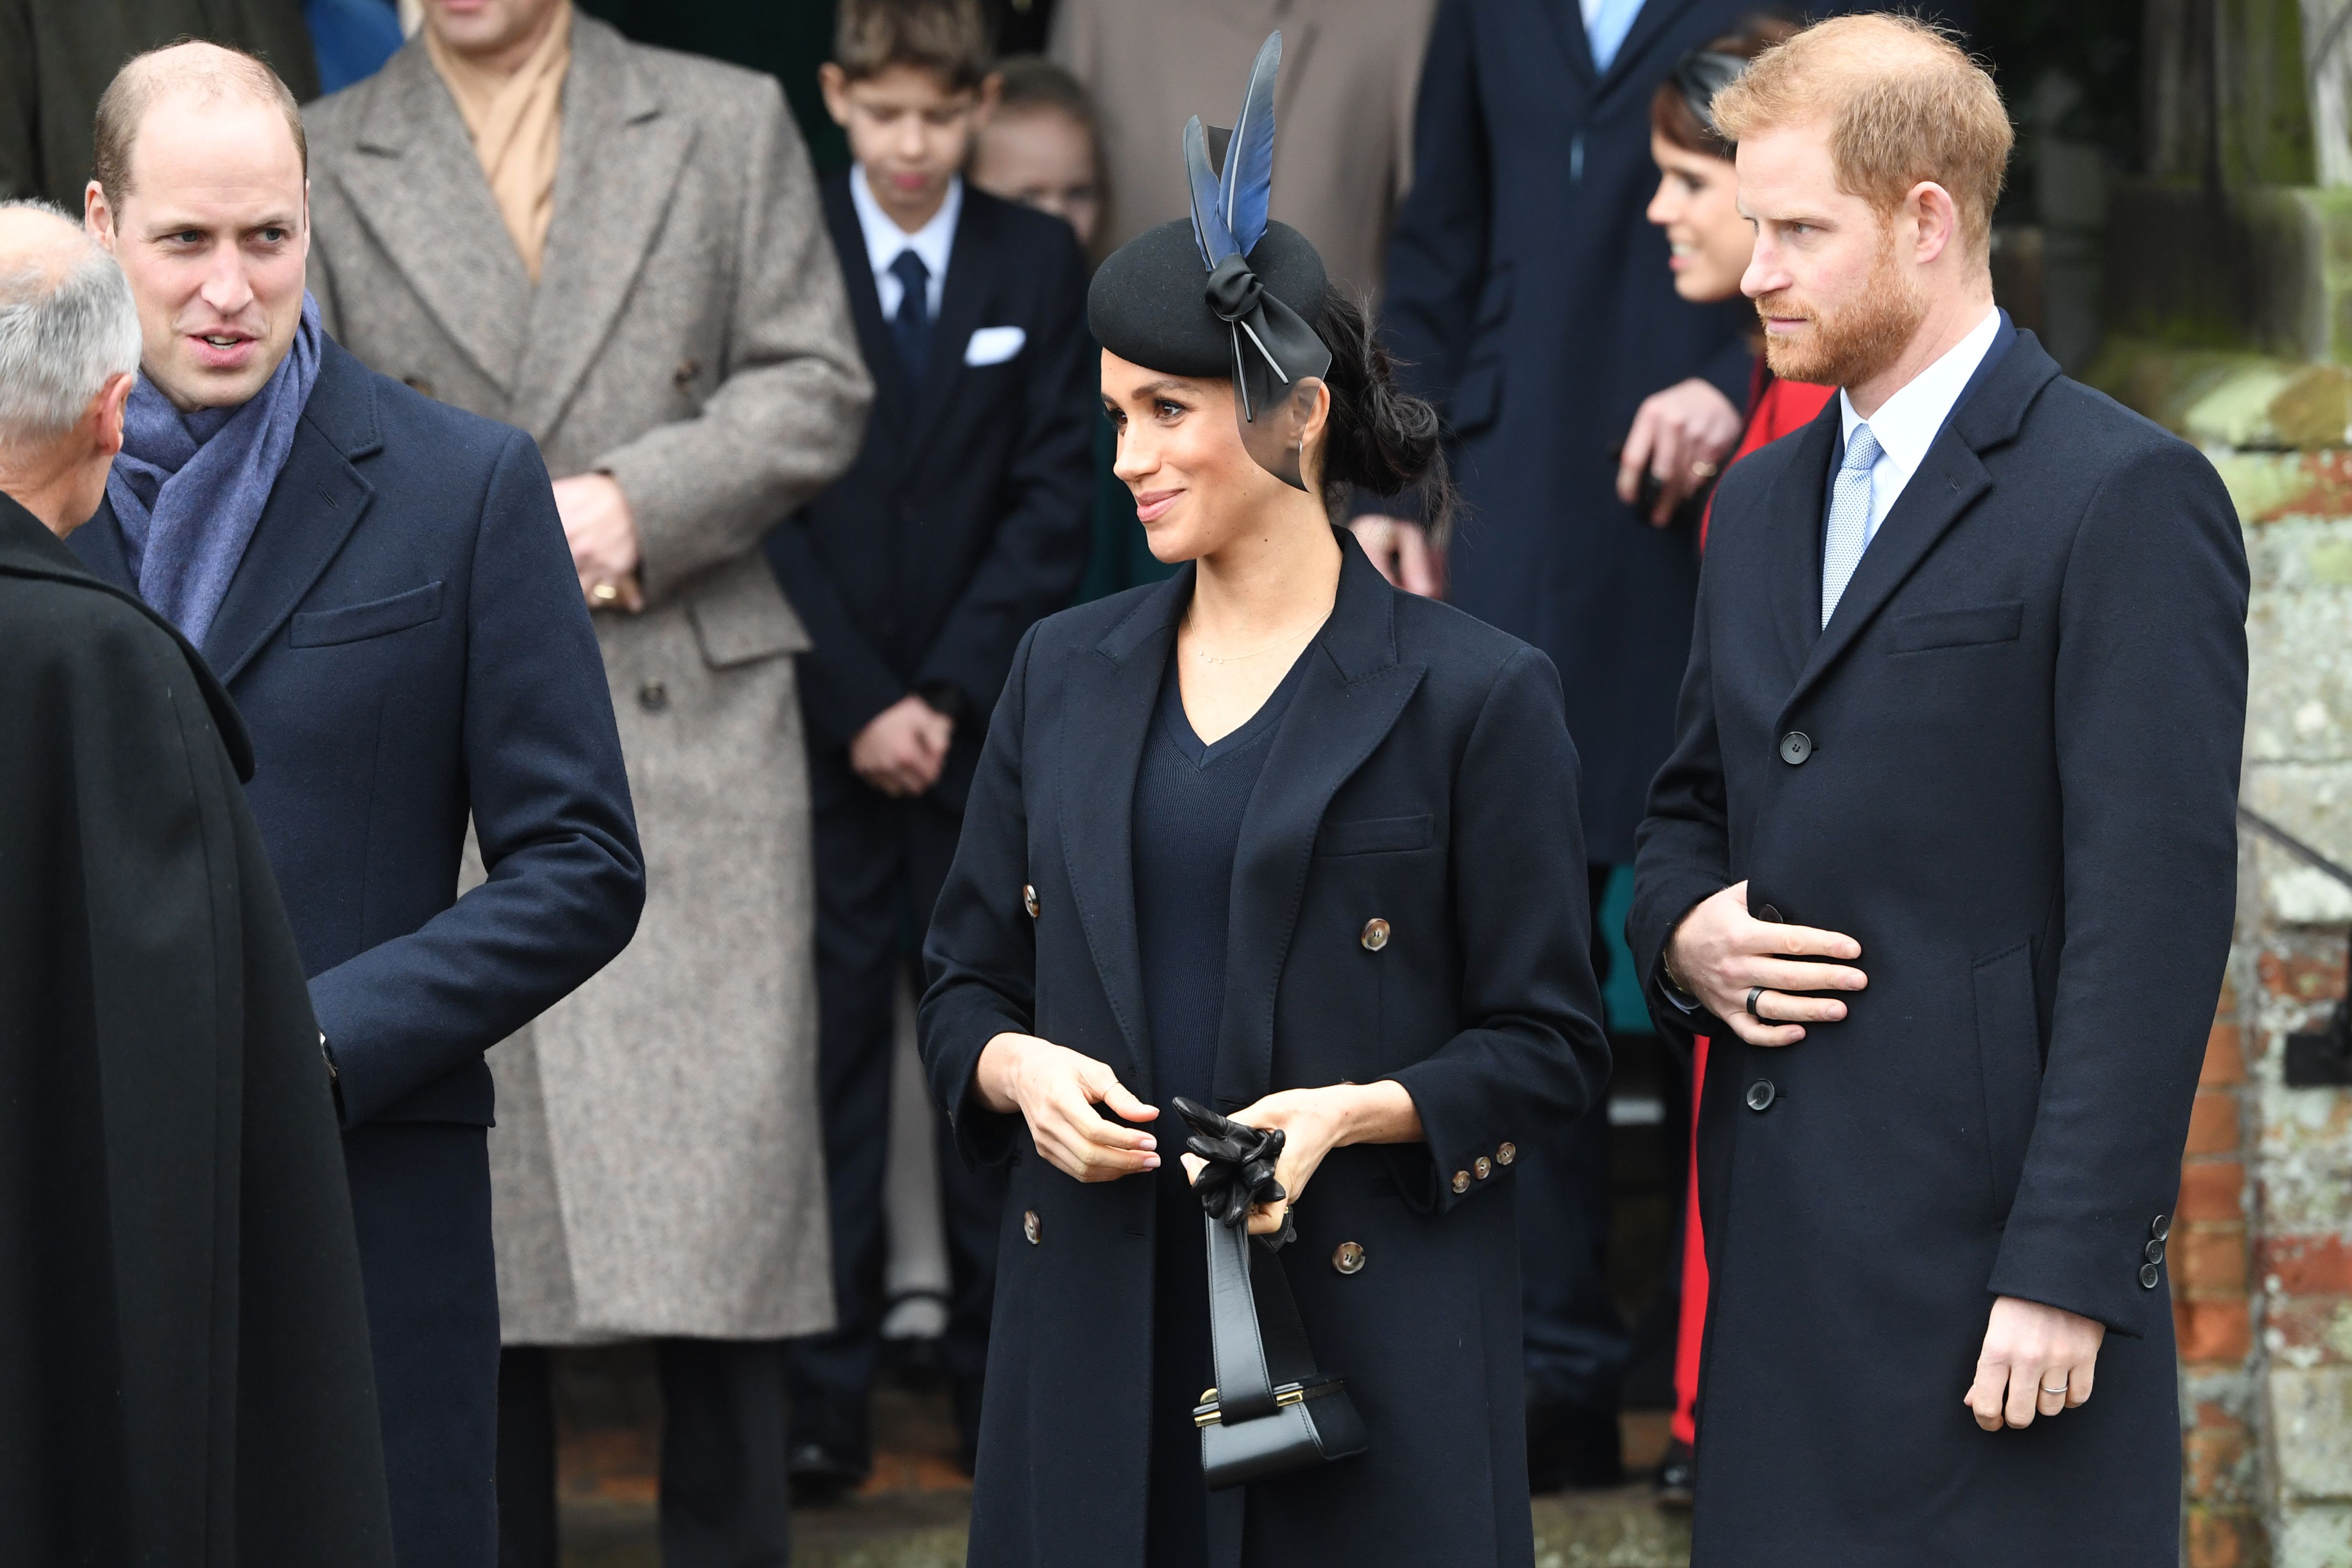 Prince William, Meghan Markle and Prince Harry pictured leaving after the Royal Family’s traditional Christmas Day service at St Mary Magdalene Church in Sandringham on December 25, 2018 in Norfolk, England.  / Source: Getty Images